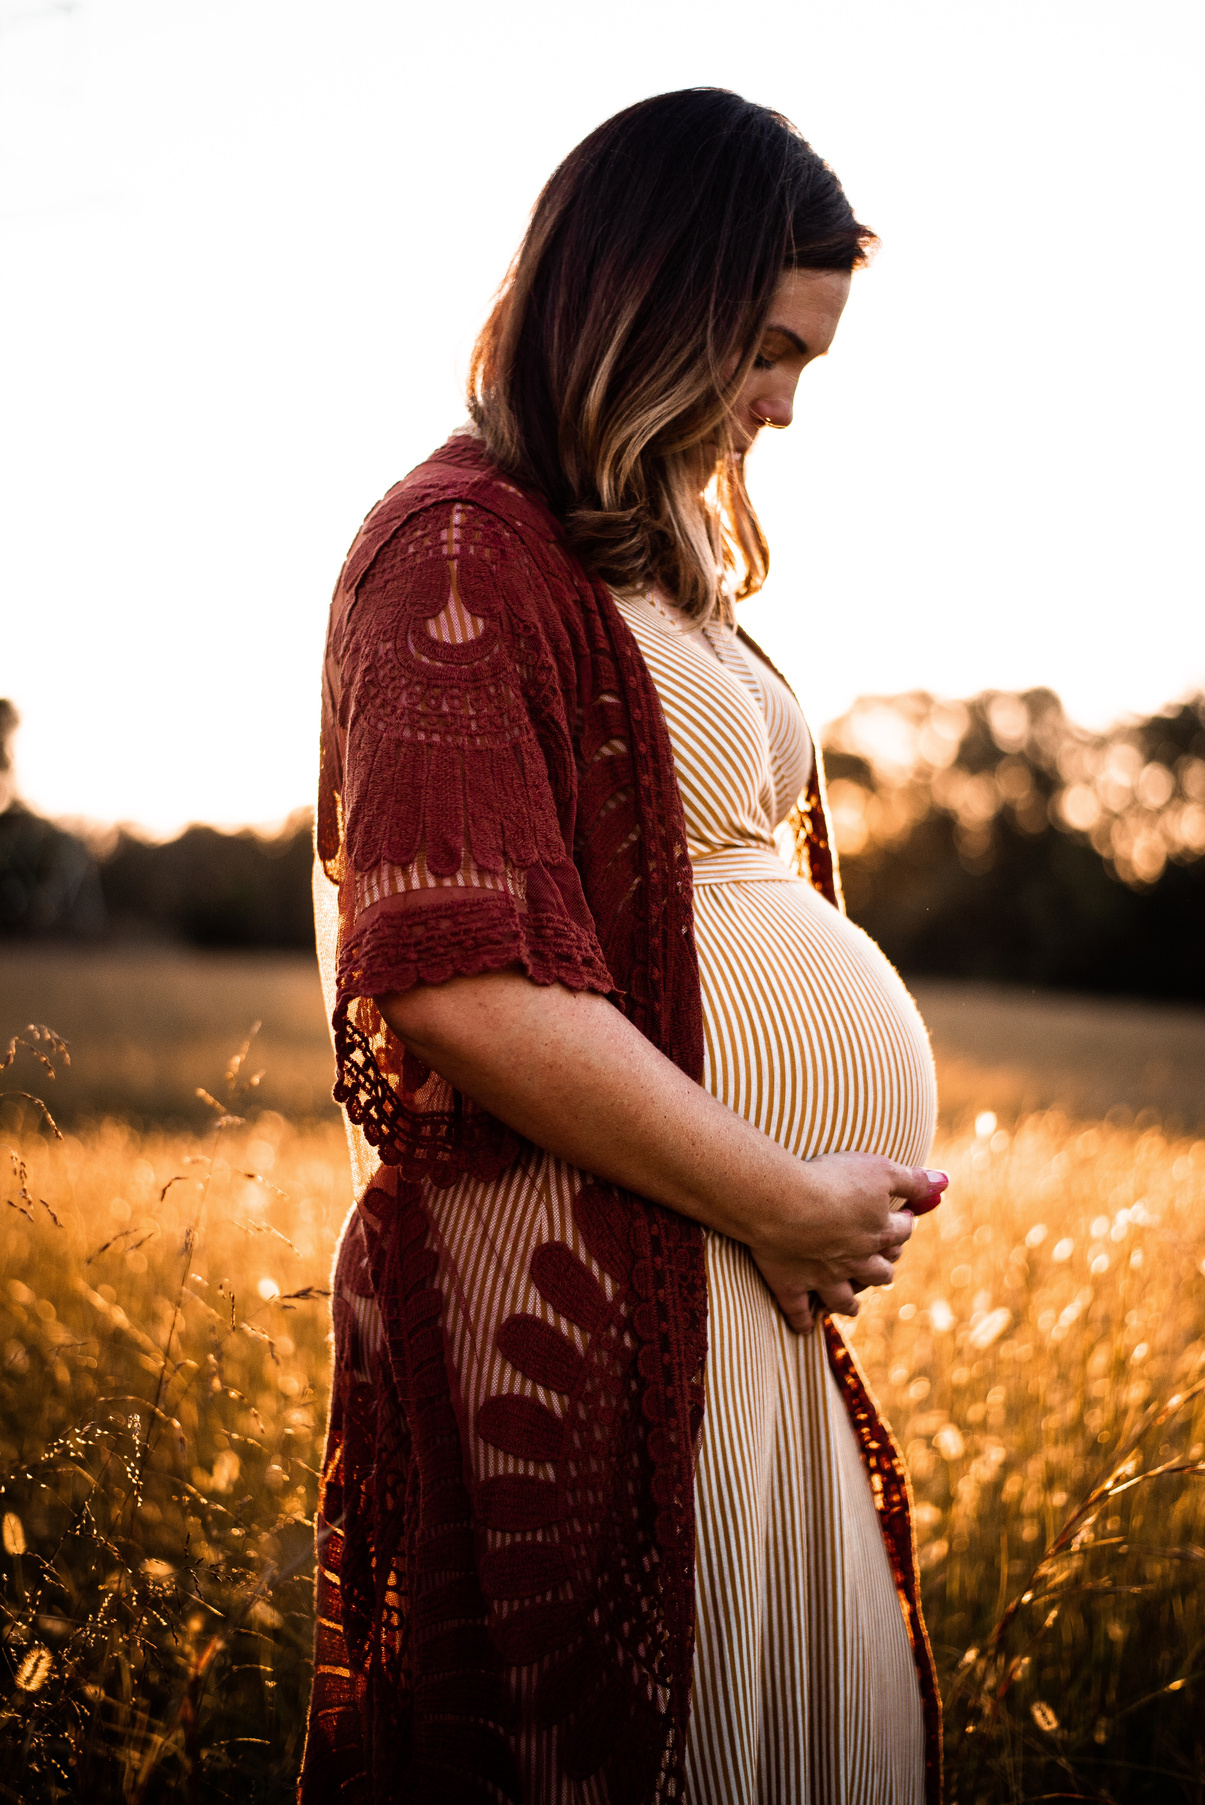 Pregnant woman holding belly in wheat field.

Midwife Kaleigh honors natural birth in out of hospital settings. 